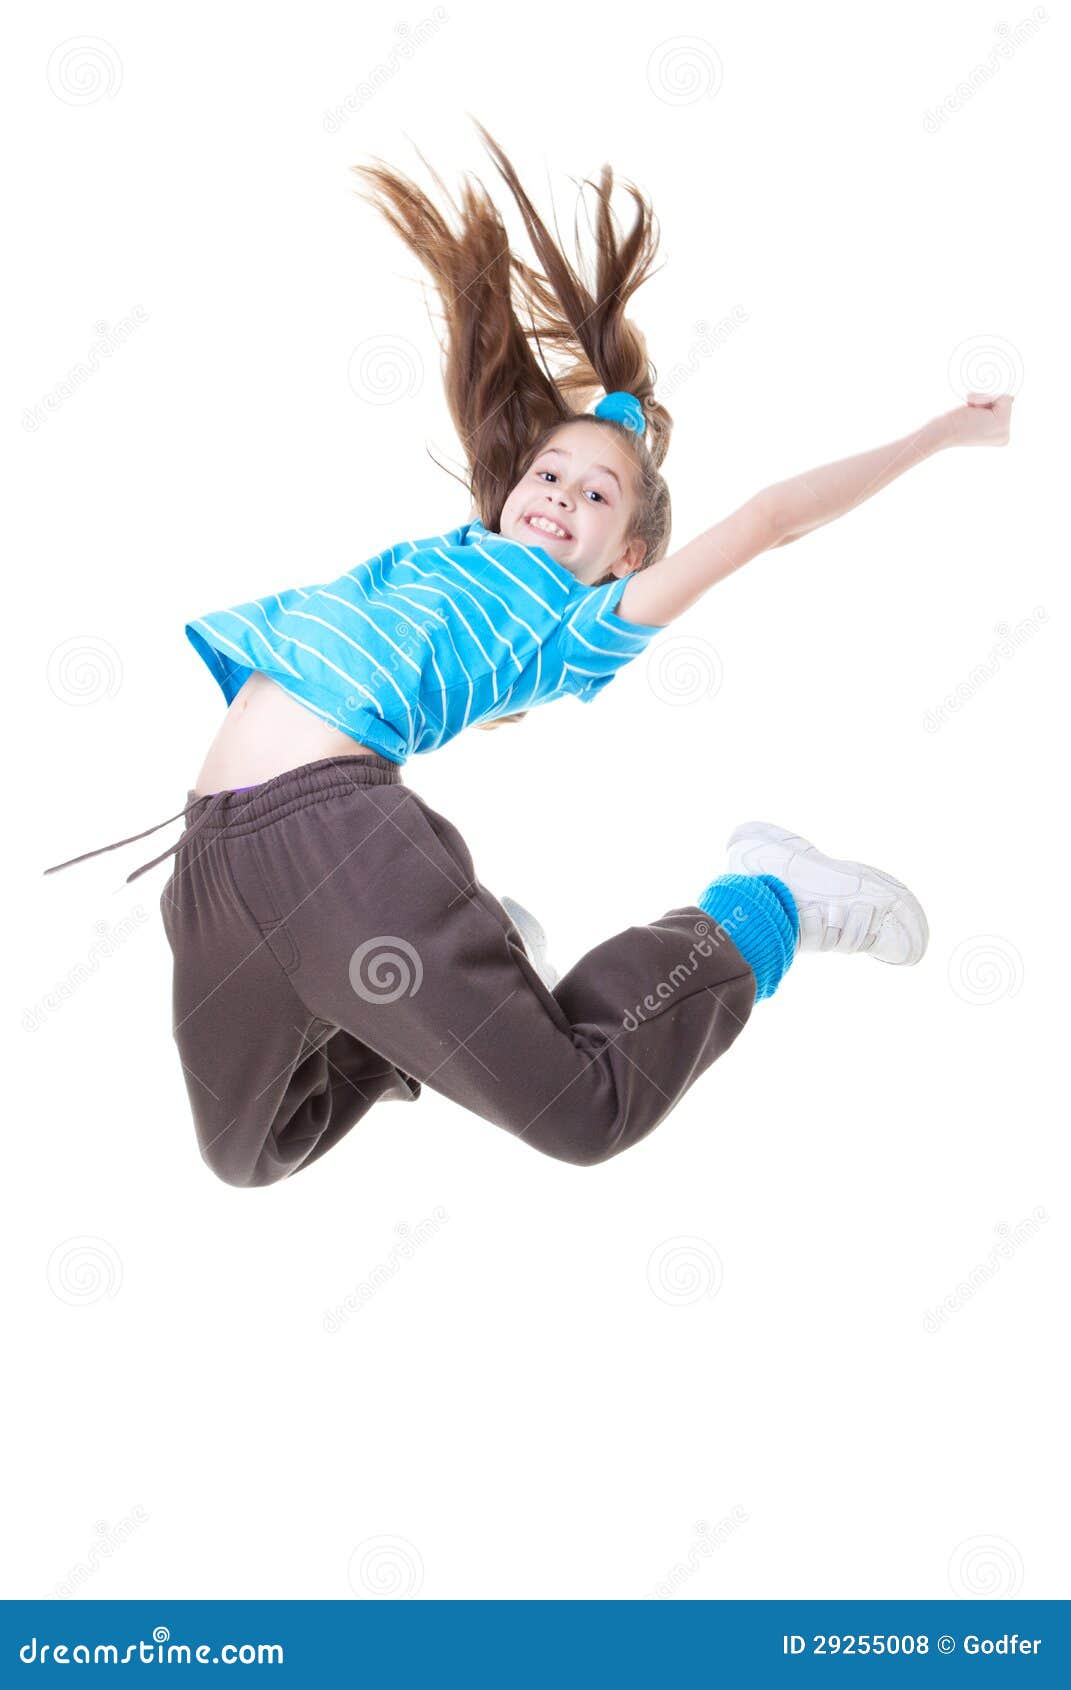 Child Or Kid Jumping Royalty Free Stock Photos - Image: 29255008